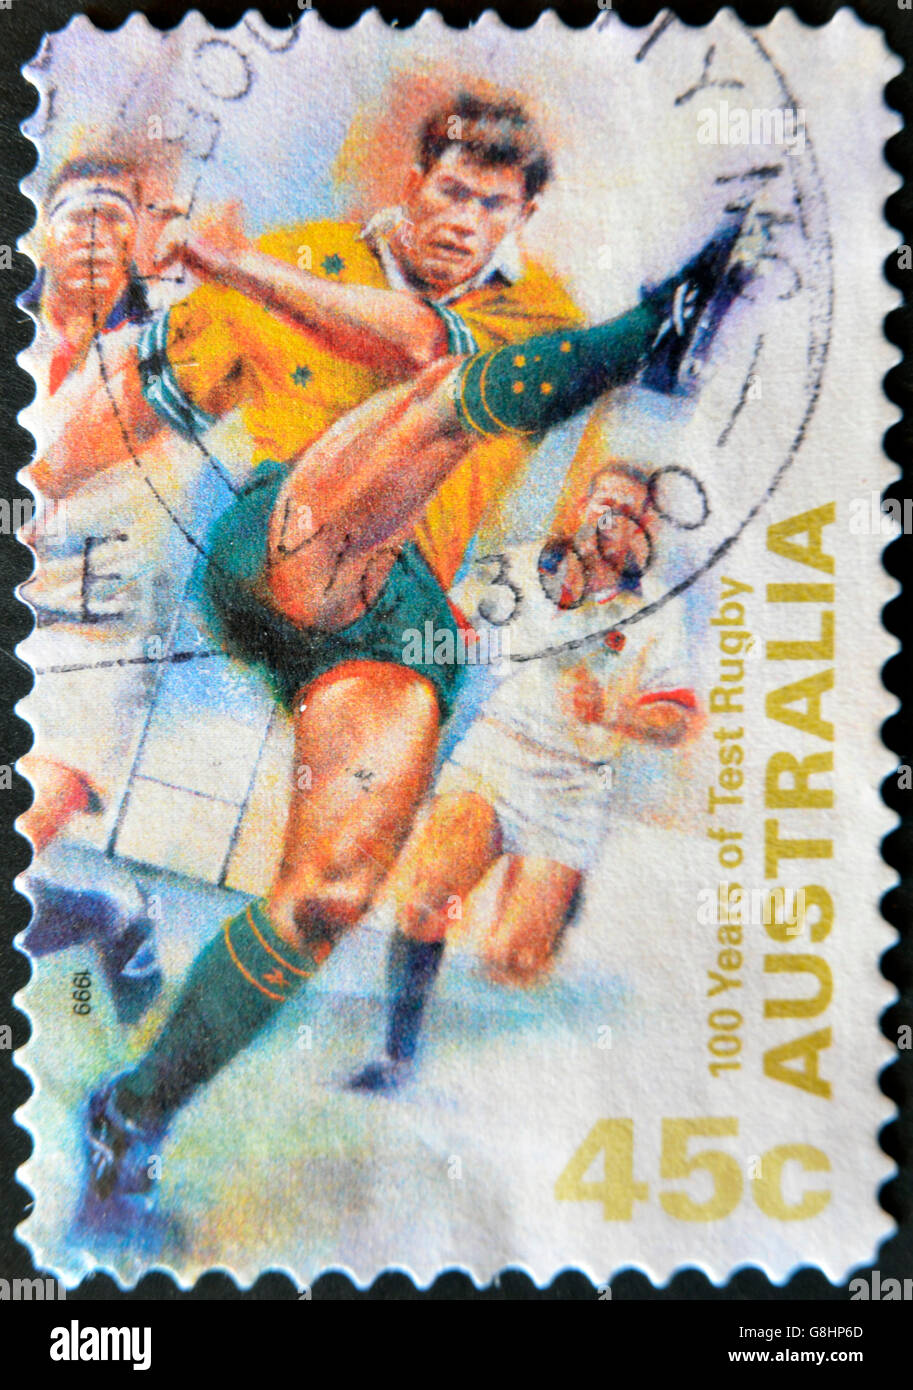 AUSTRALIA - CIRCA 1999: A stamp printed in Australia shows 100 years of Test rugby, circa 1999 Stock Photo